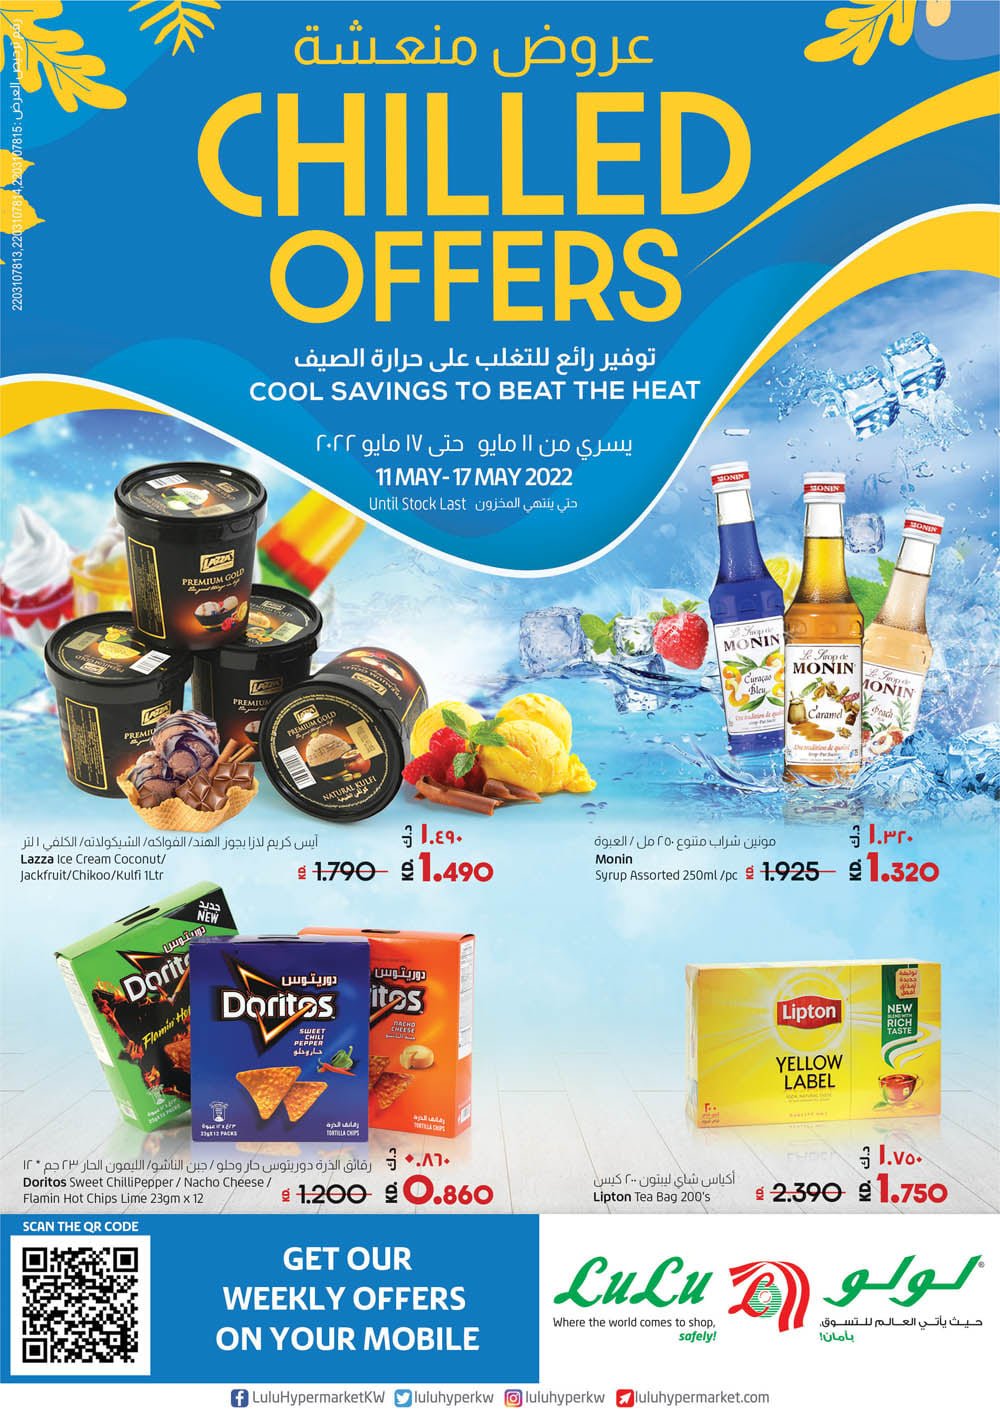 Lulu Hypermarket Chilled Offers, iiQ8 weekly promotions 1